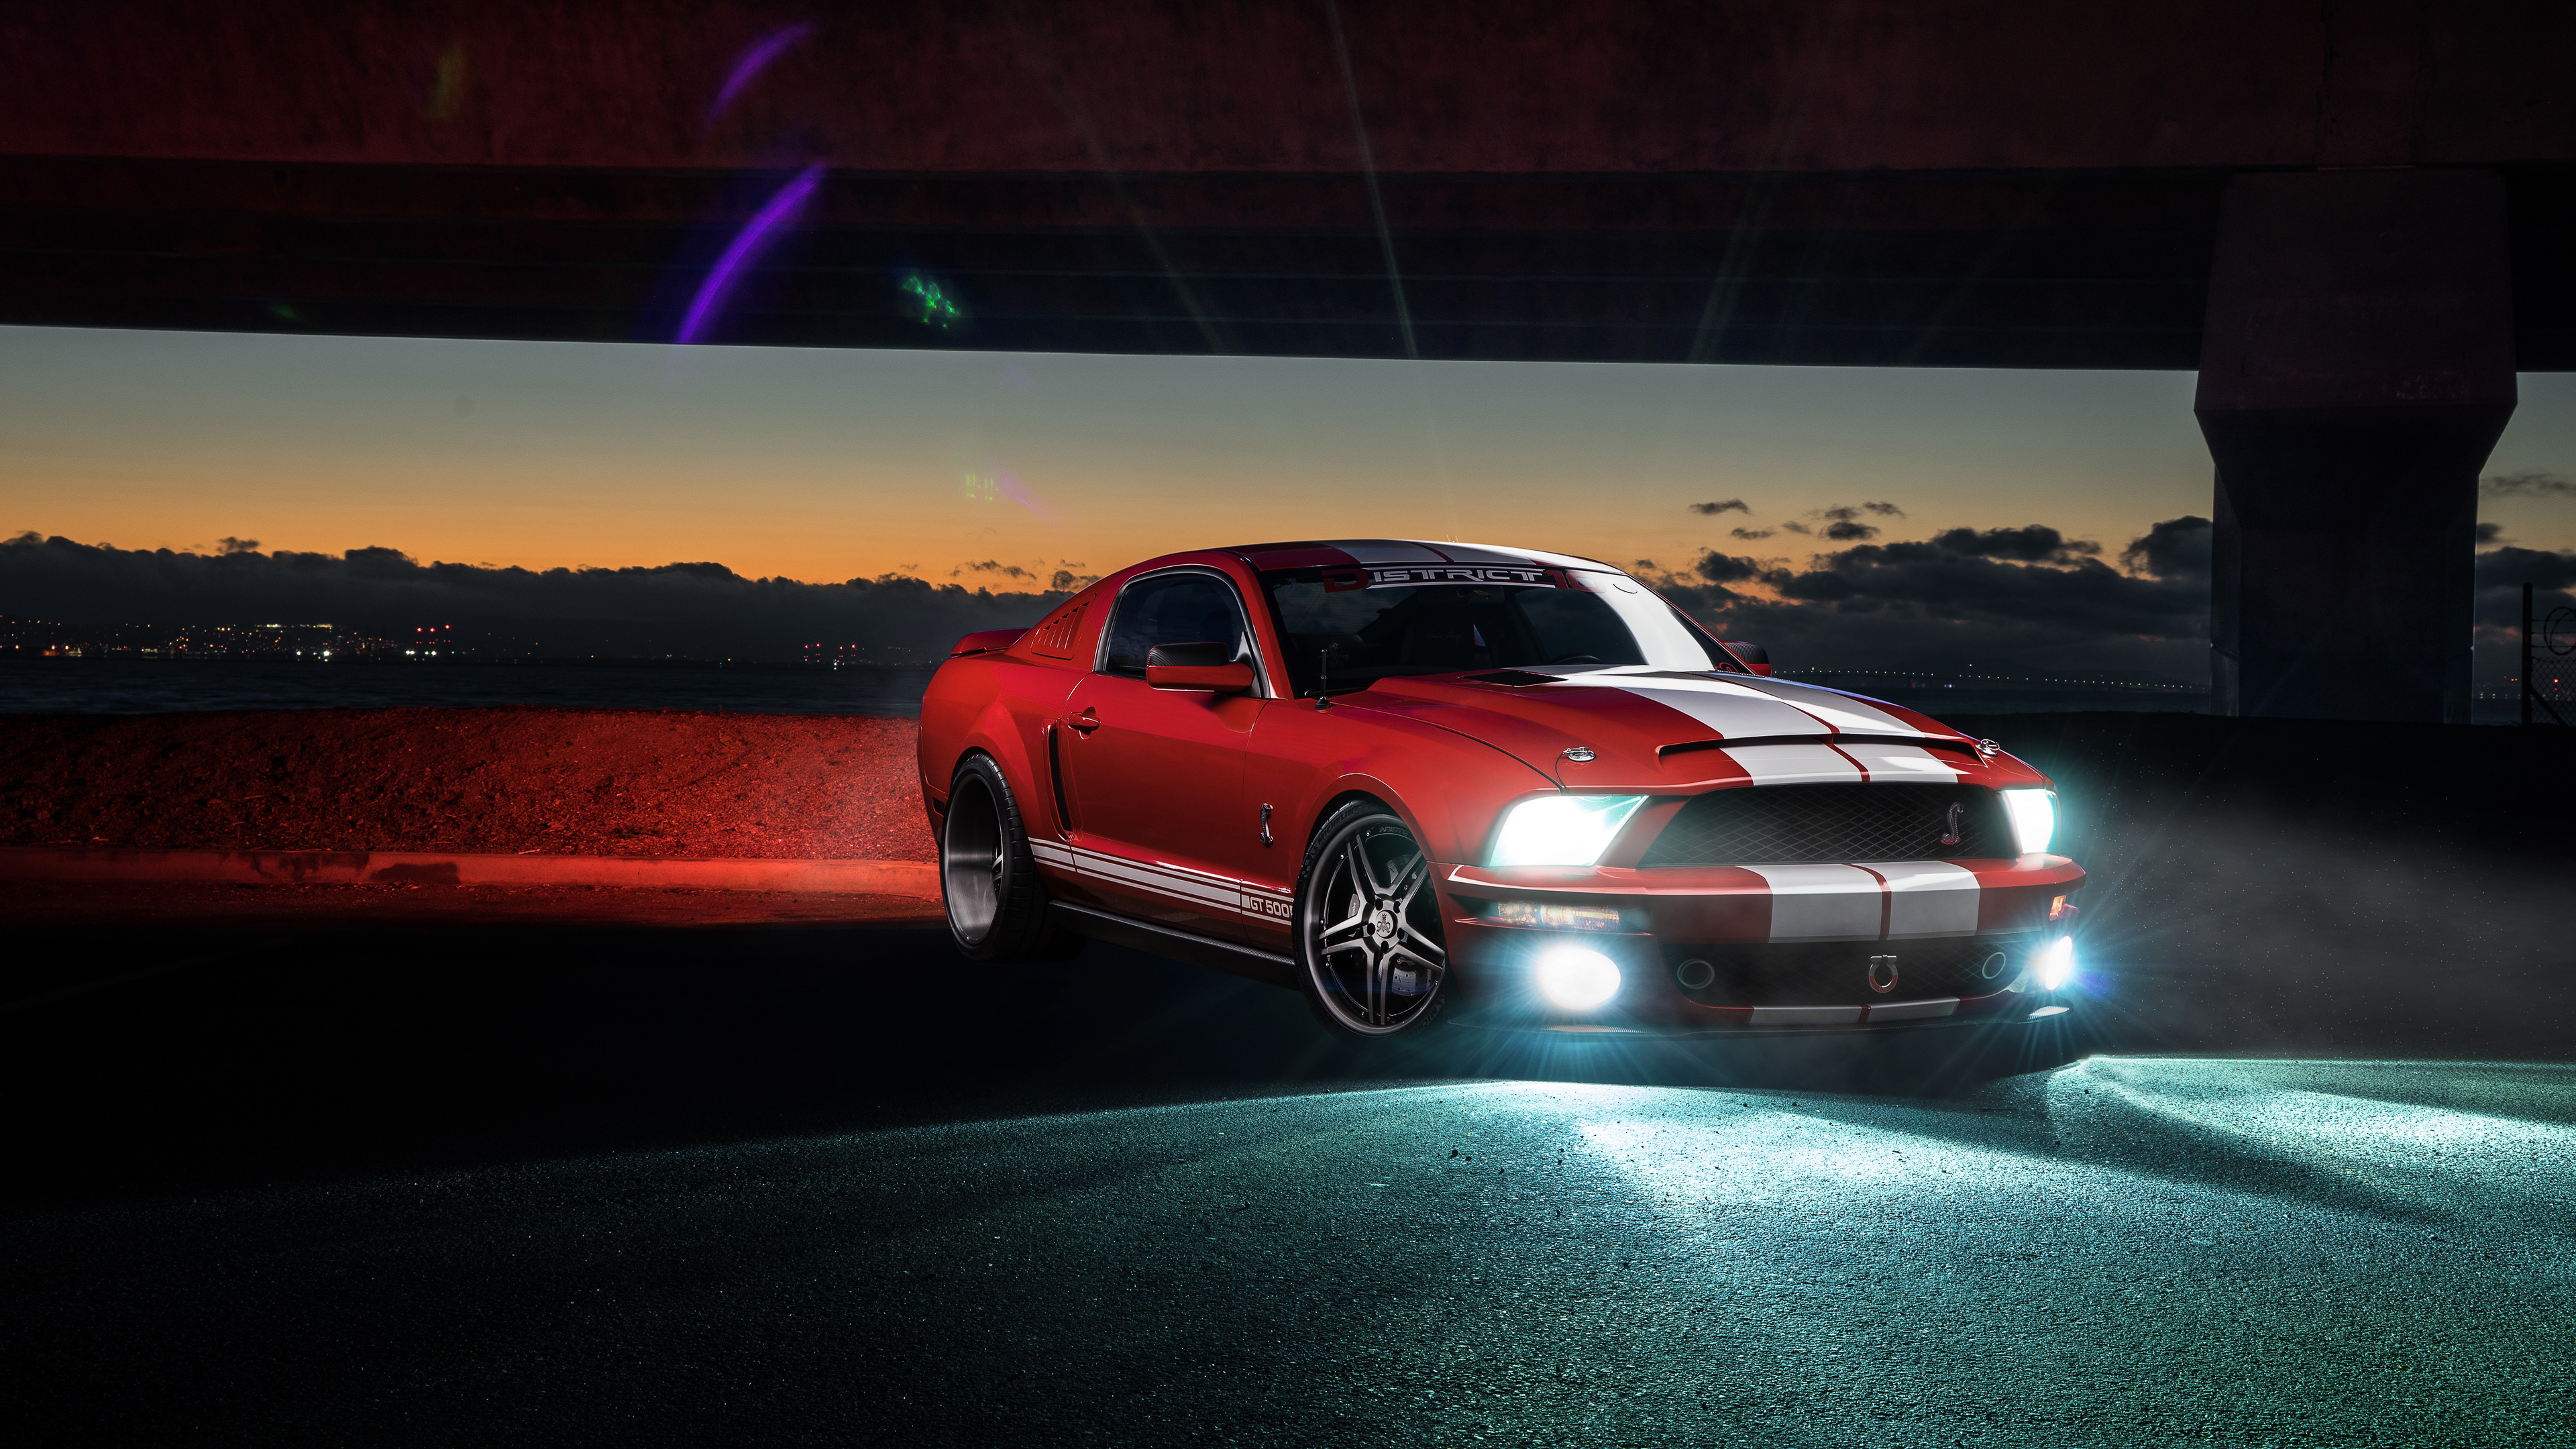 Ford Shelby Gt500 Mustang - Ford Mustang Gt500 Wallpaper Hd , HD Wallpaper & Backgrounds